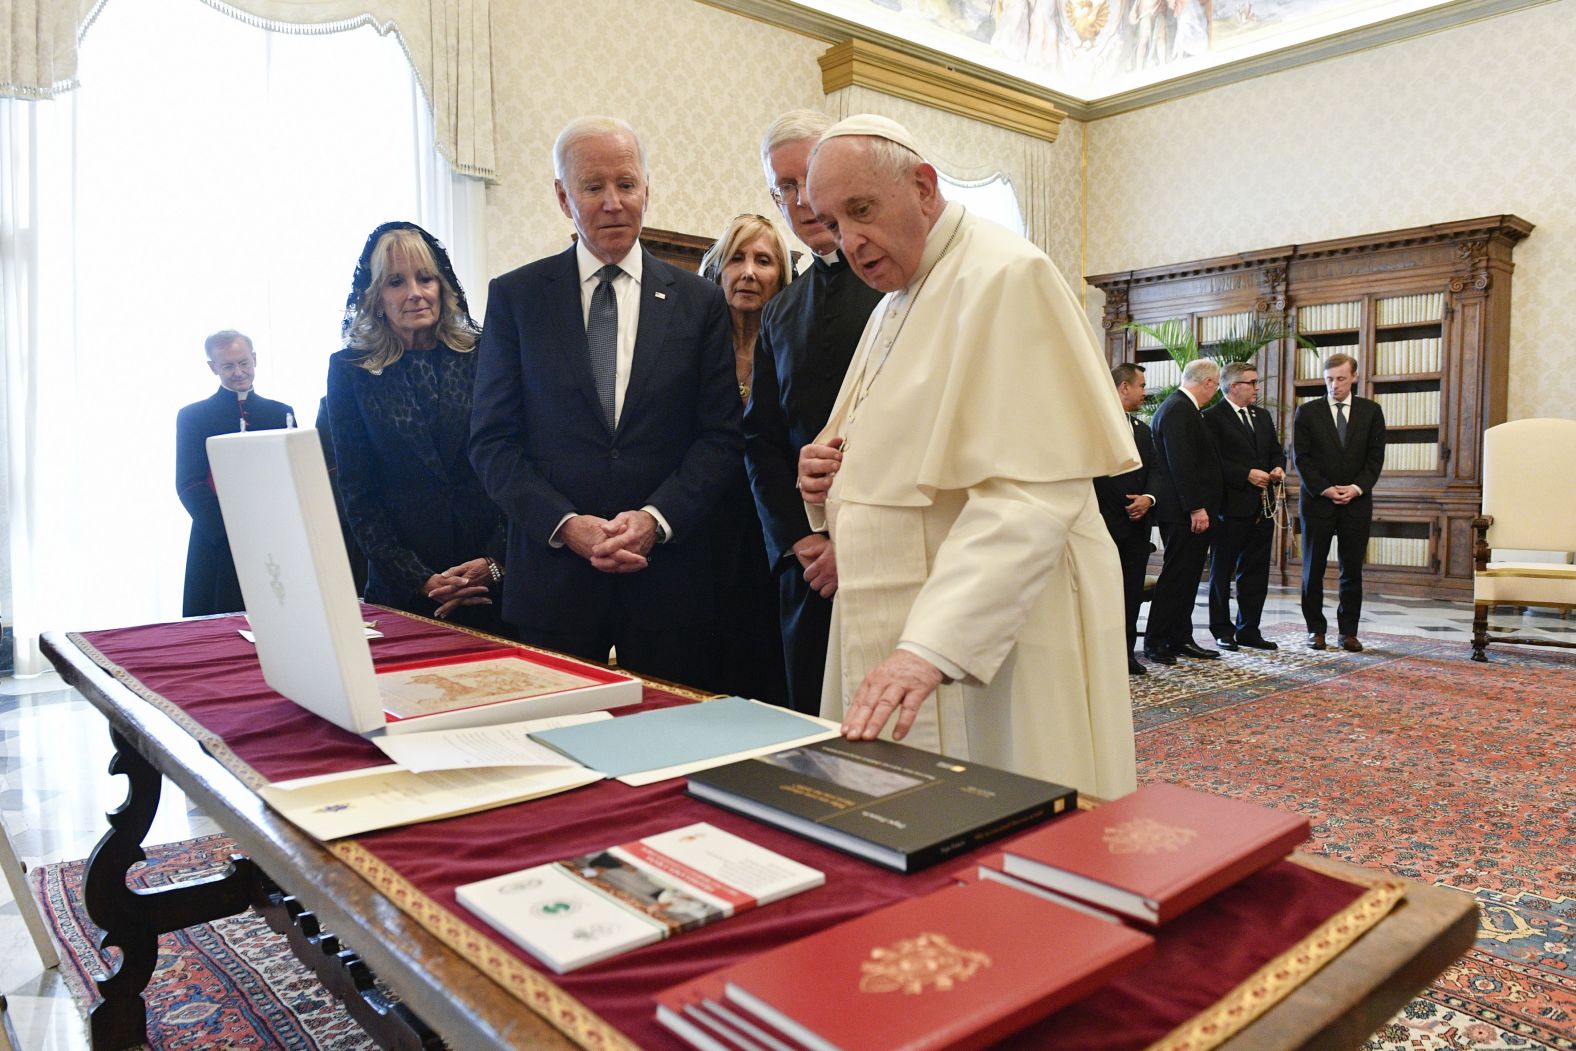 The Bidens exchange gifts with the Pope.